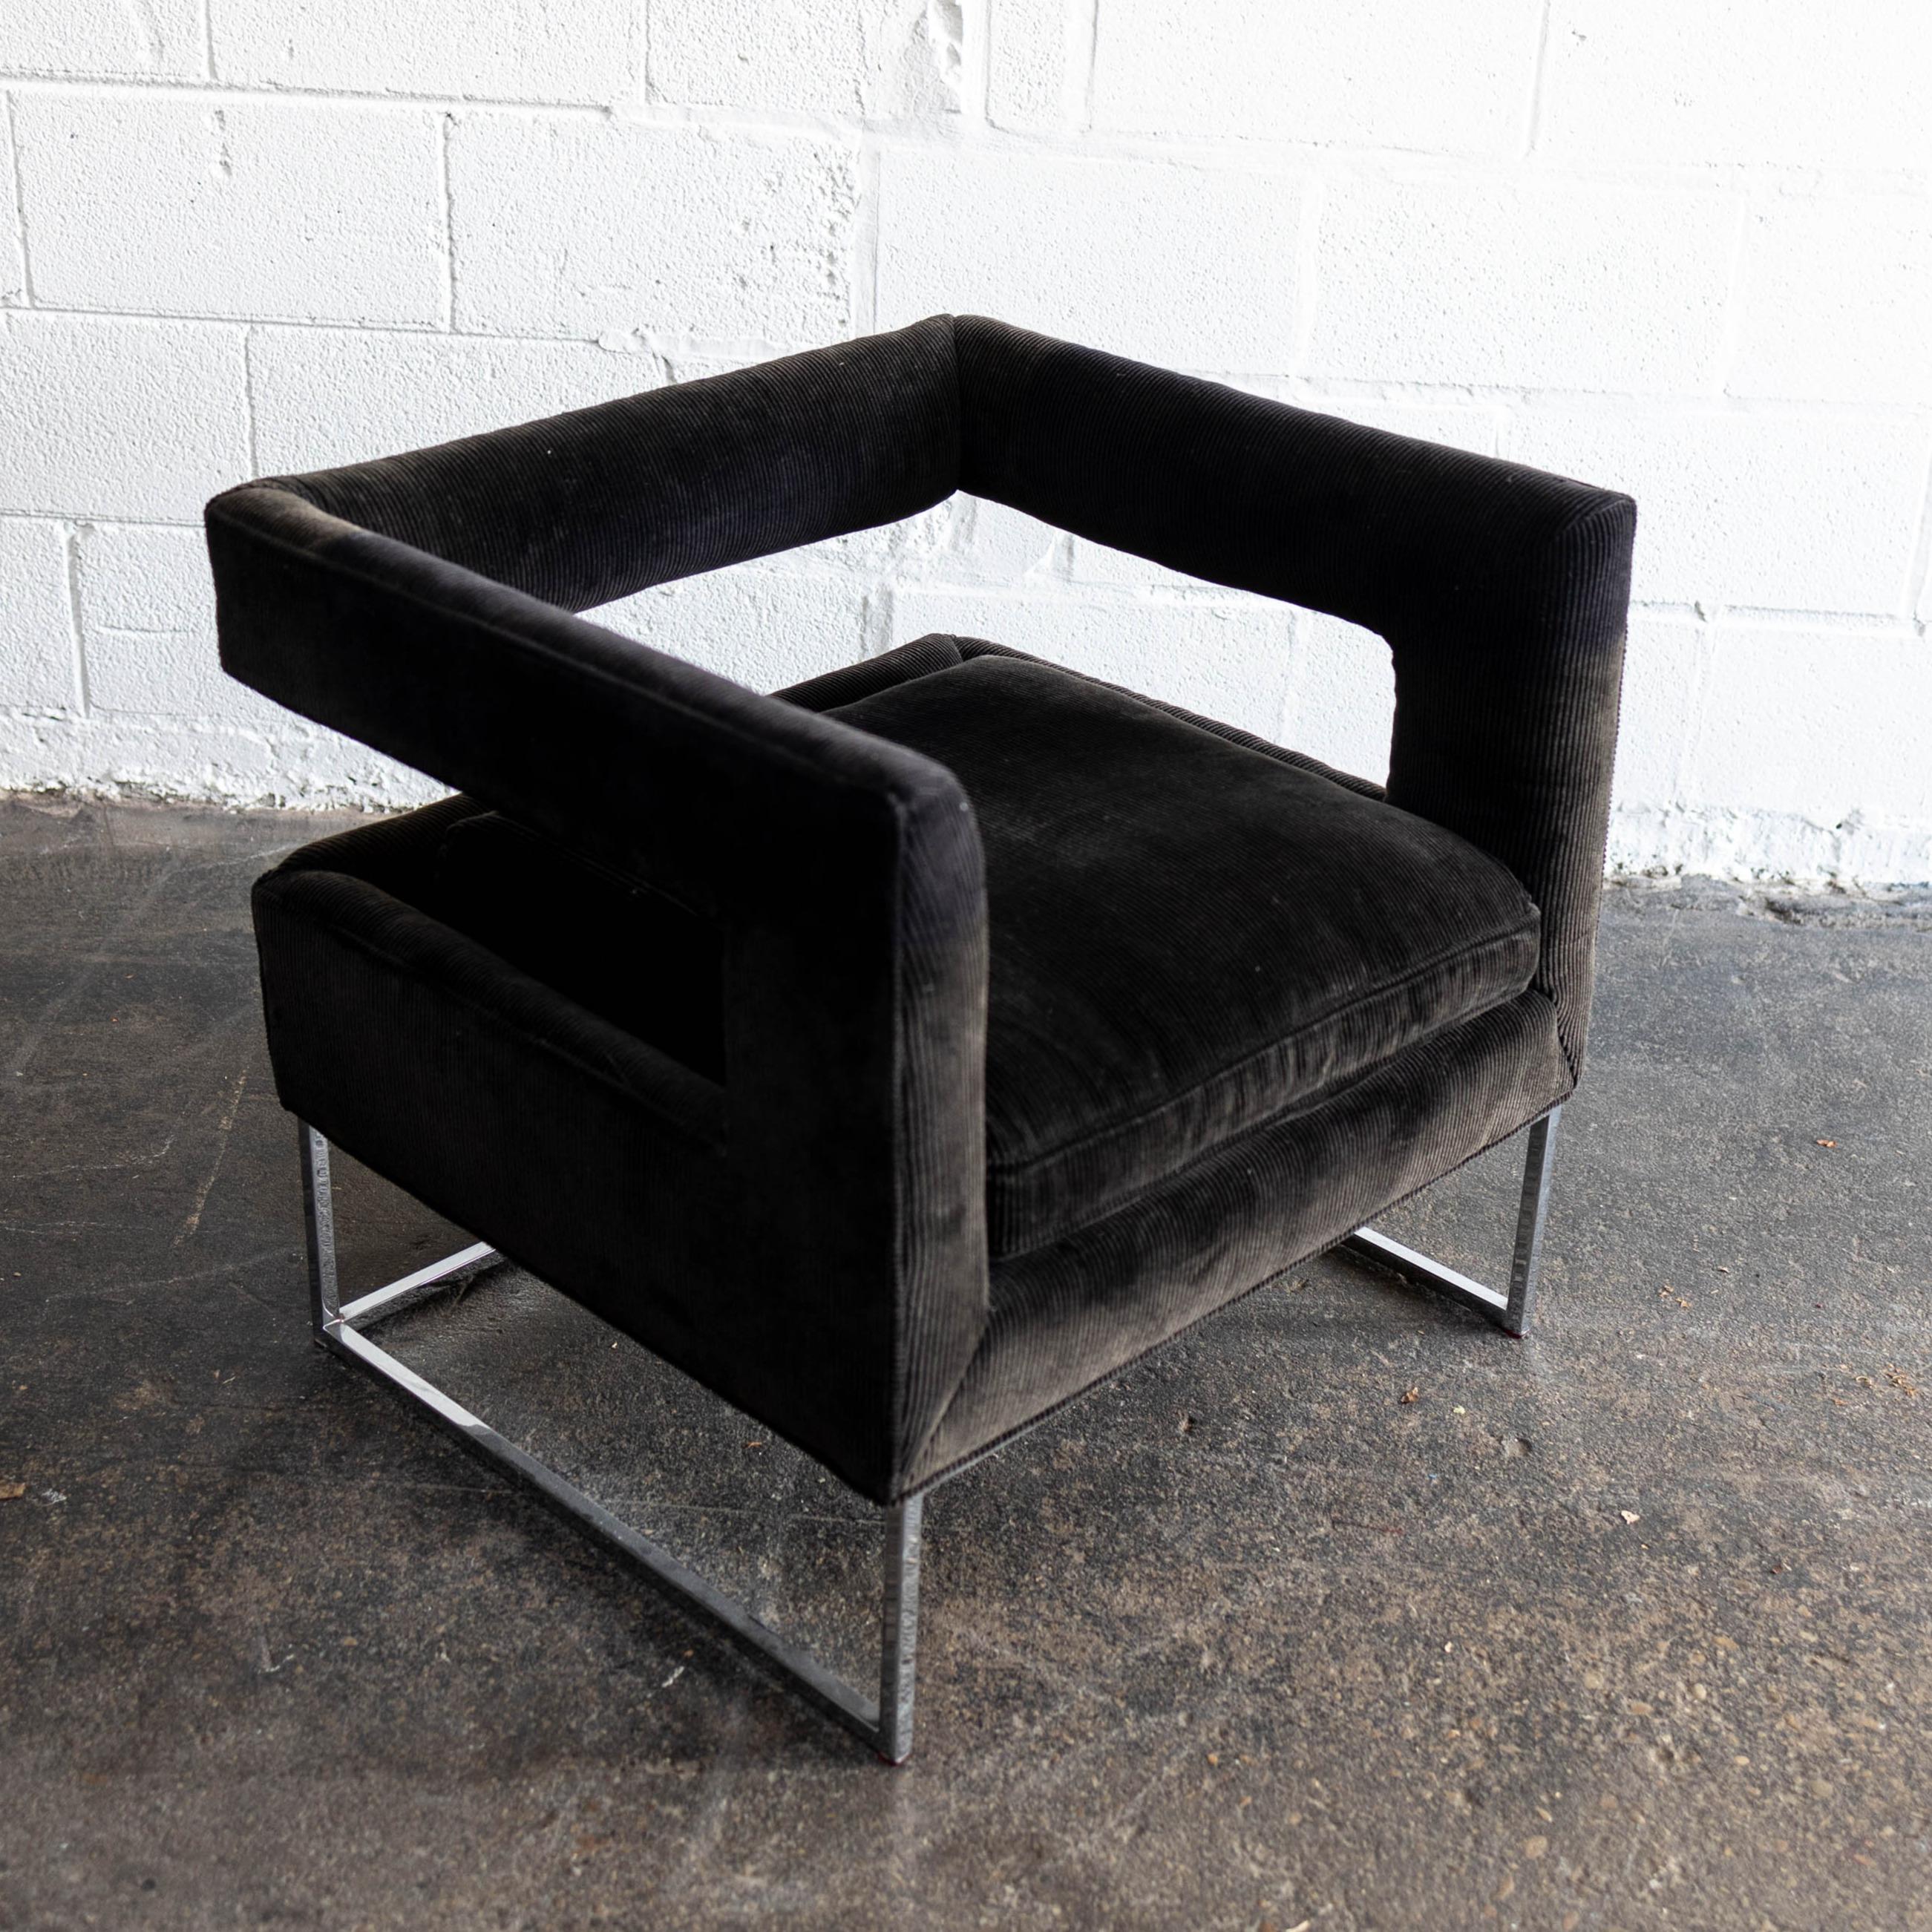 upholstered in their original black / dark charcoal corduroy with a lovely chrome base